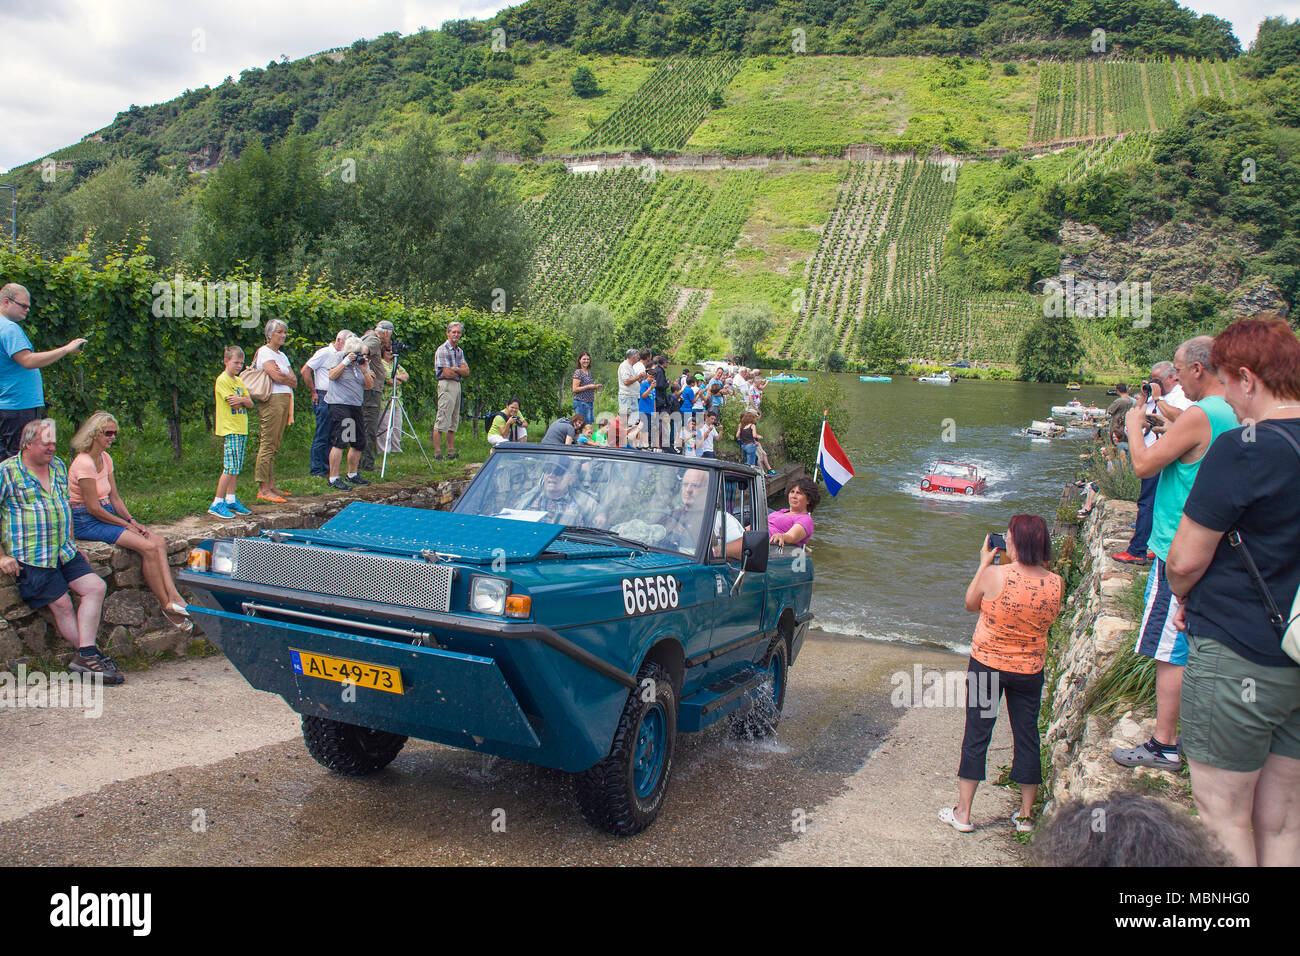 Amphibien car driving from slipway on land, Moselle river at Neumagen-Dhron, Rhineland-Palatinate, Germany Stock Photo